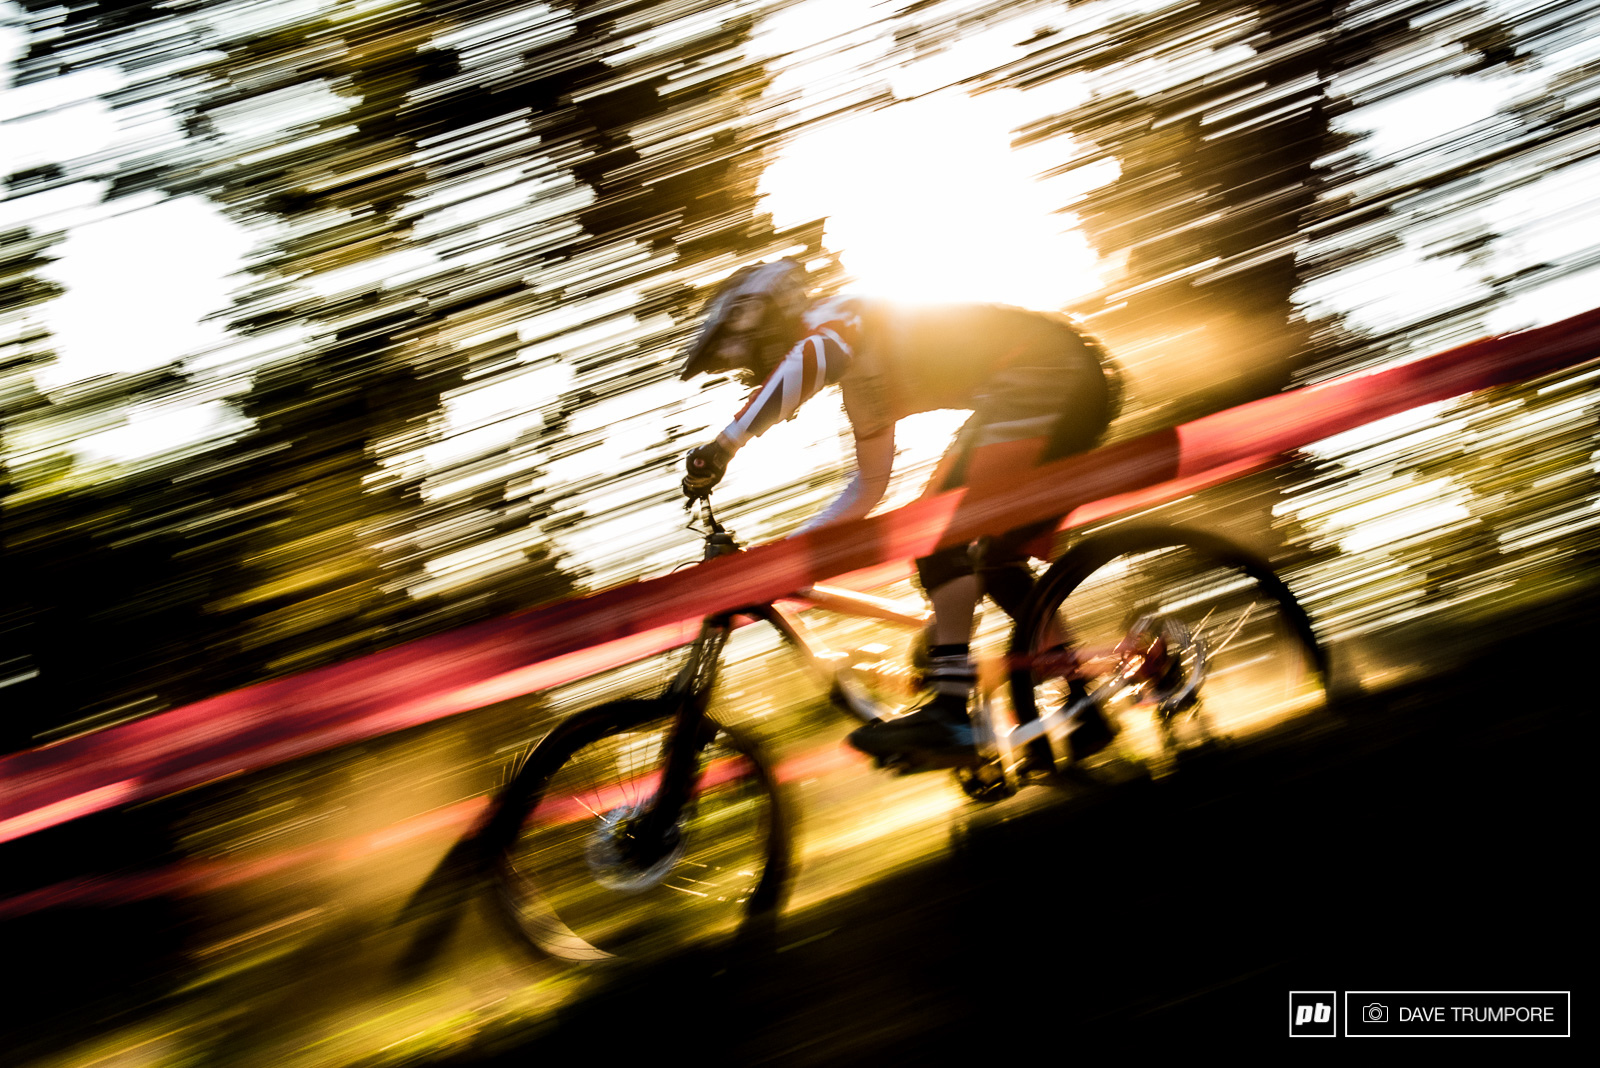 Matt Walker drops in during the morning golden hour. He would take 5th later in the day in junior qualifying.